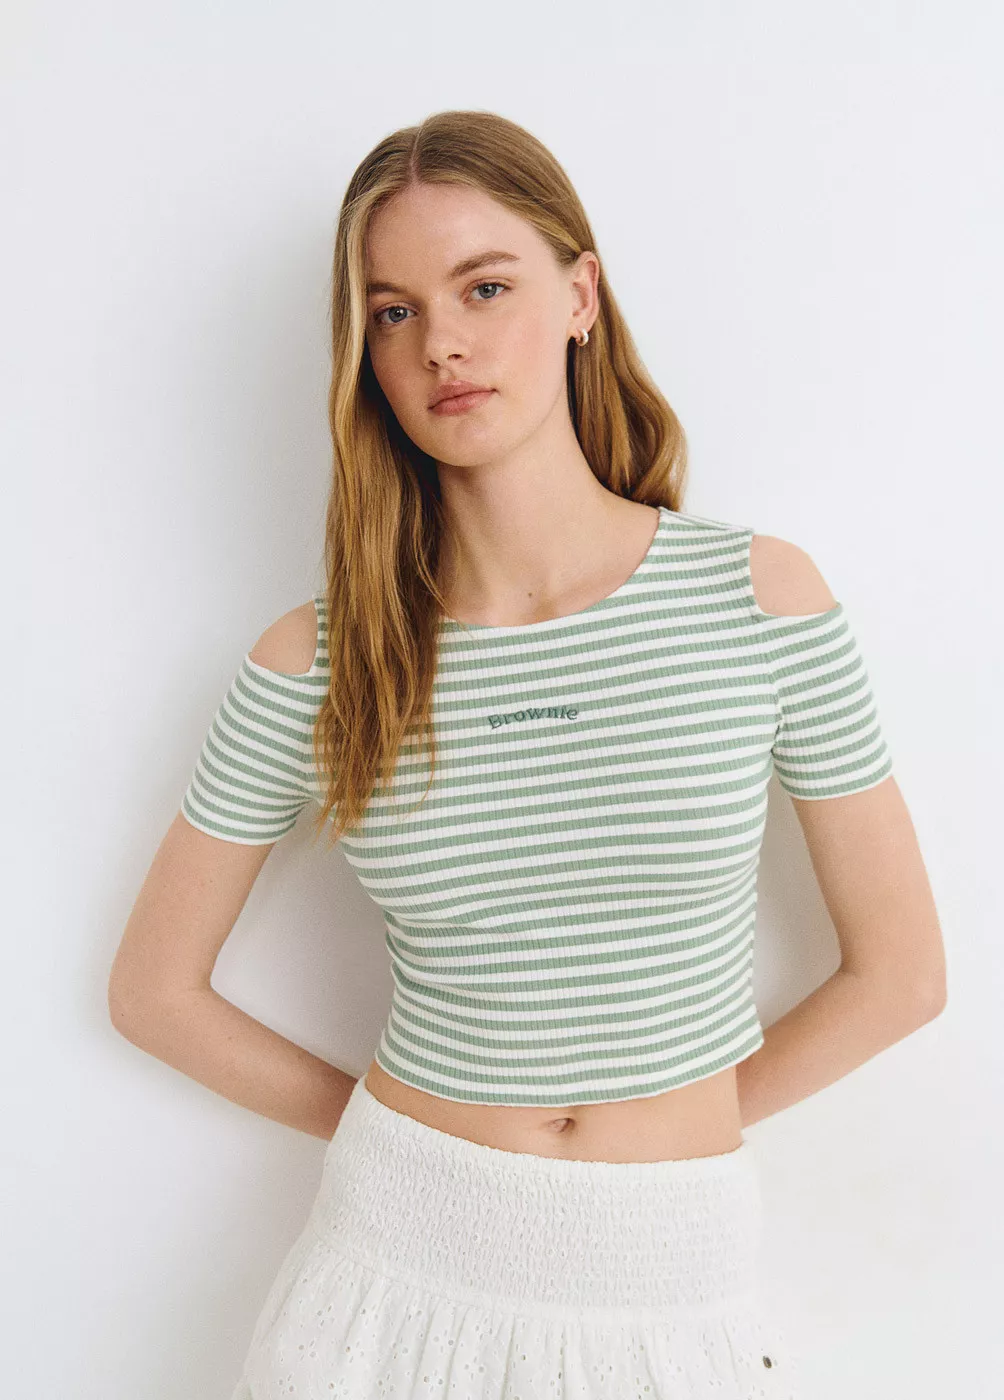 Striped t-shirt with...